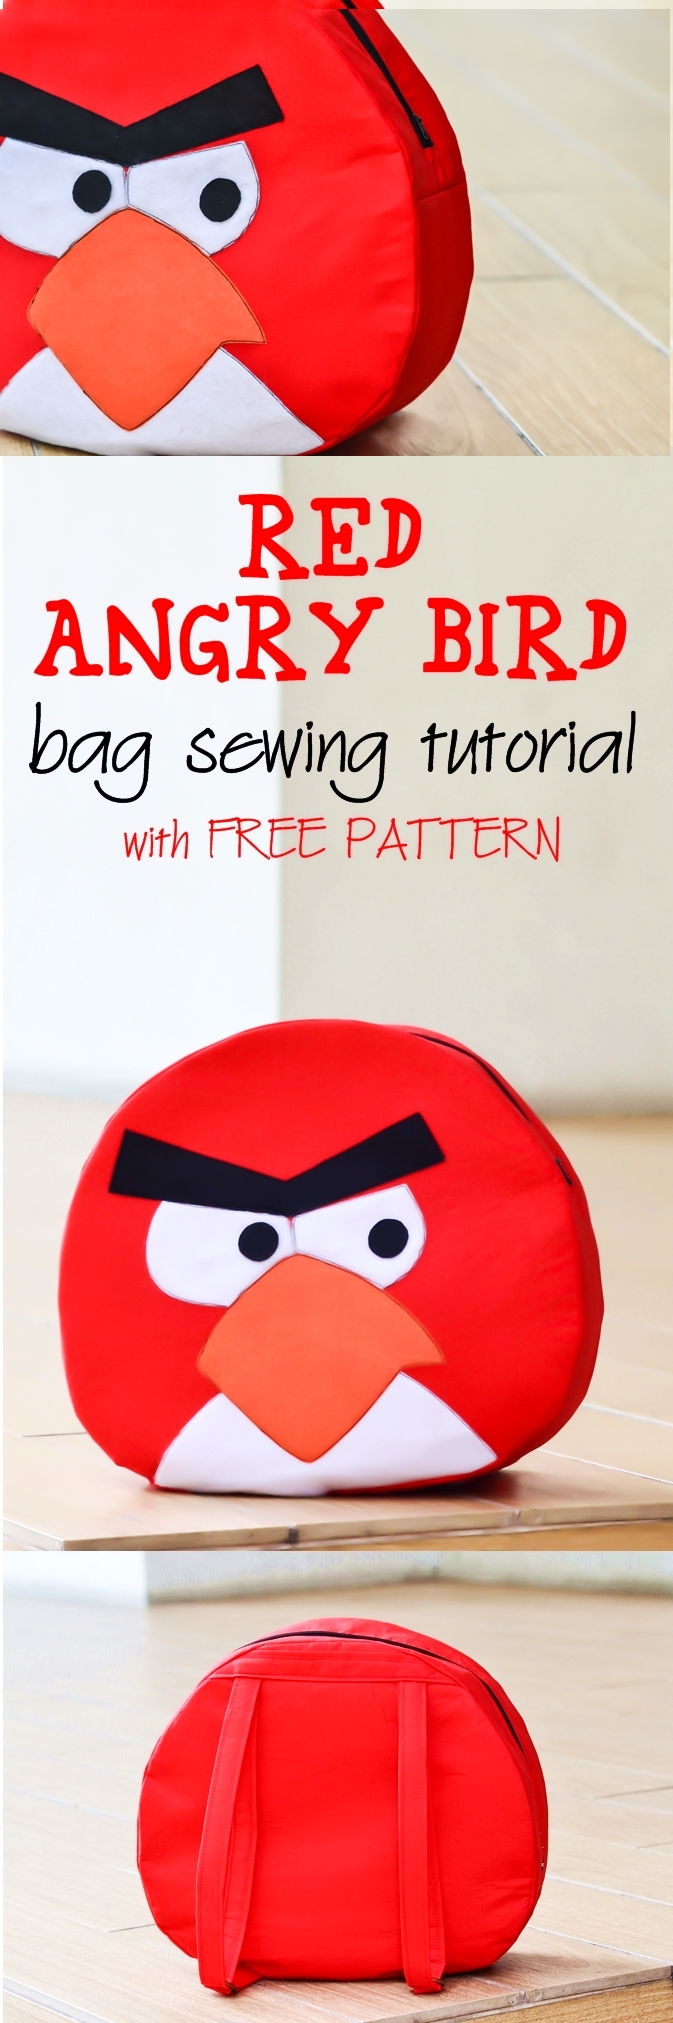 Learn to make a super cute Angry bird bag for your little crazy angry bird fans. This tutorial also has A FREE SEWING PATTERN. Check it out now!